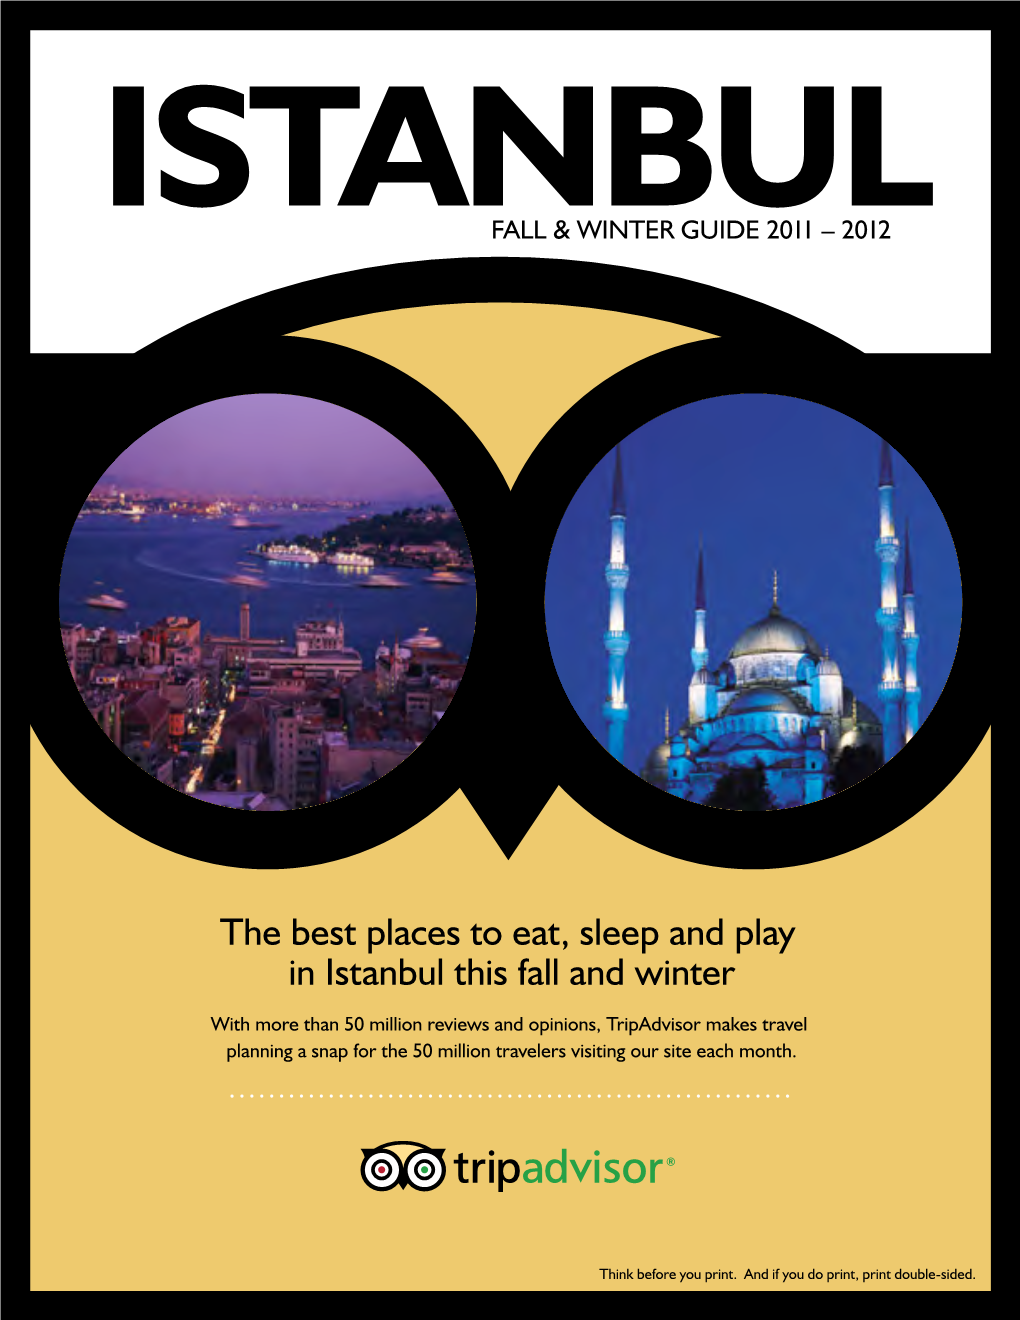 Istanbulfall & Winter Guide 2011 – 2012